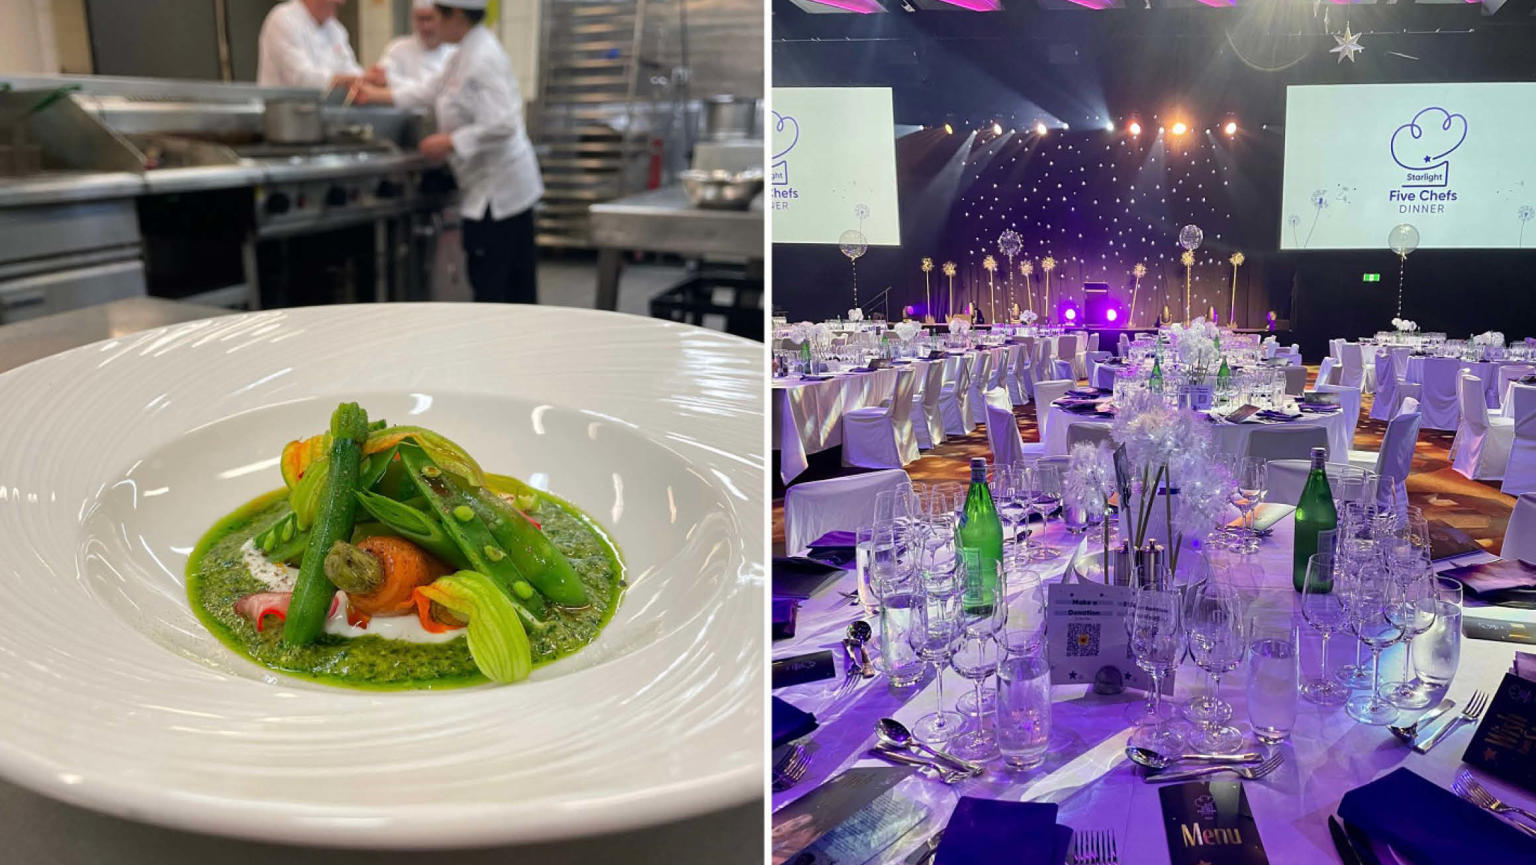 Two images displayed side by side: On the left, a white plate adorned with green pesto sauce, generously topped with a delightful assortment of colourful vegetables. On the right, a spacious room filled with round tables dressed in white tablecloths, adorned with an array of glasses, bottles, menus, and meticulously arranged cutlery. 